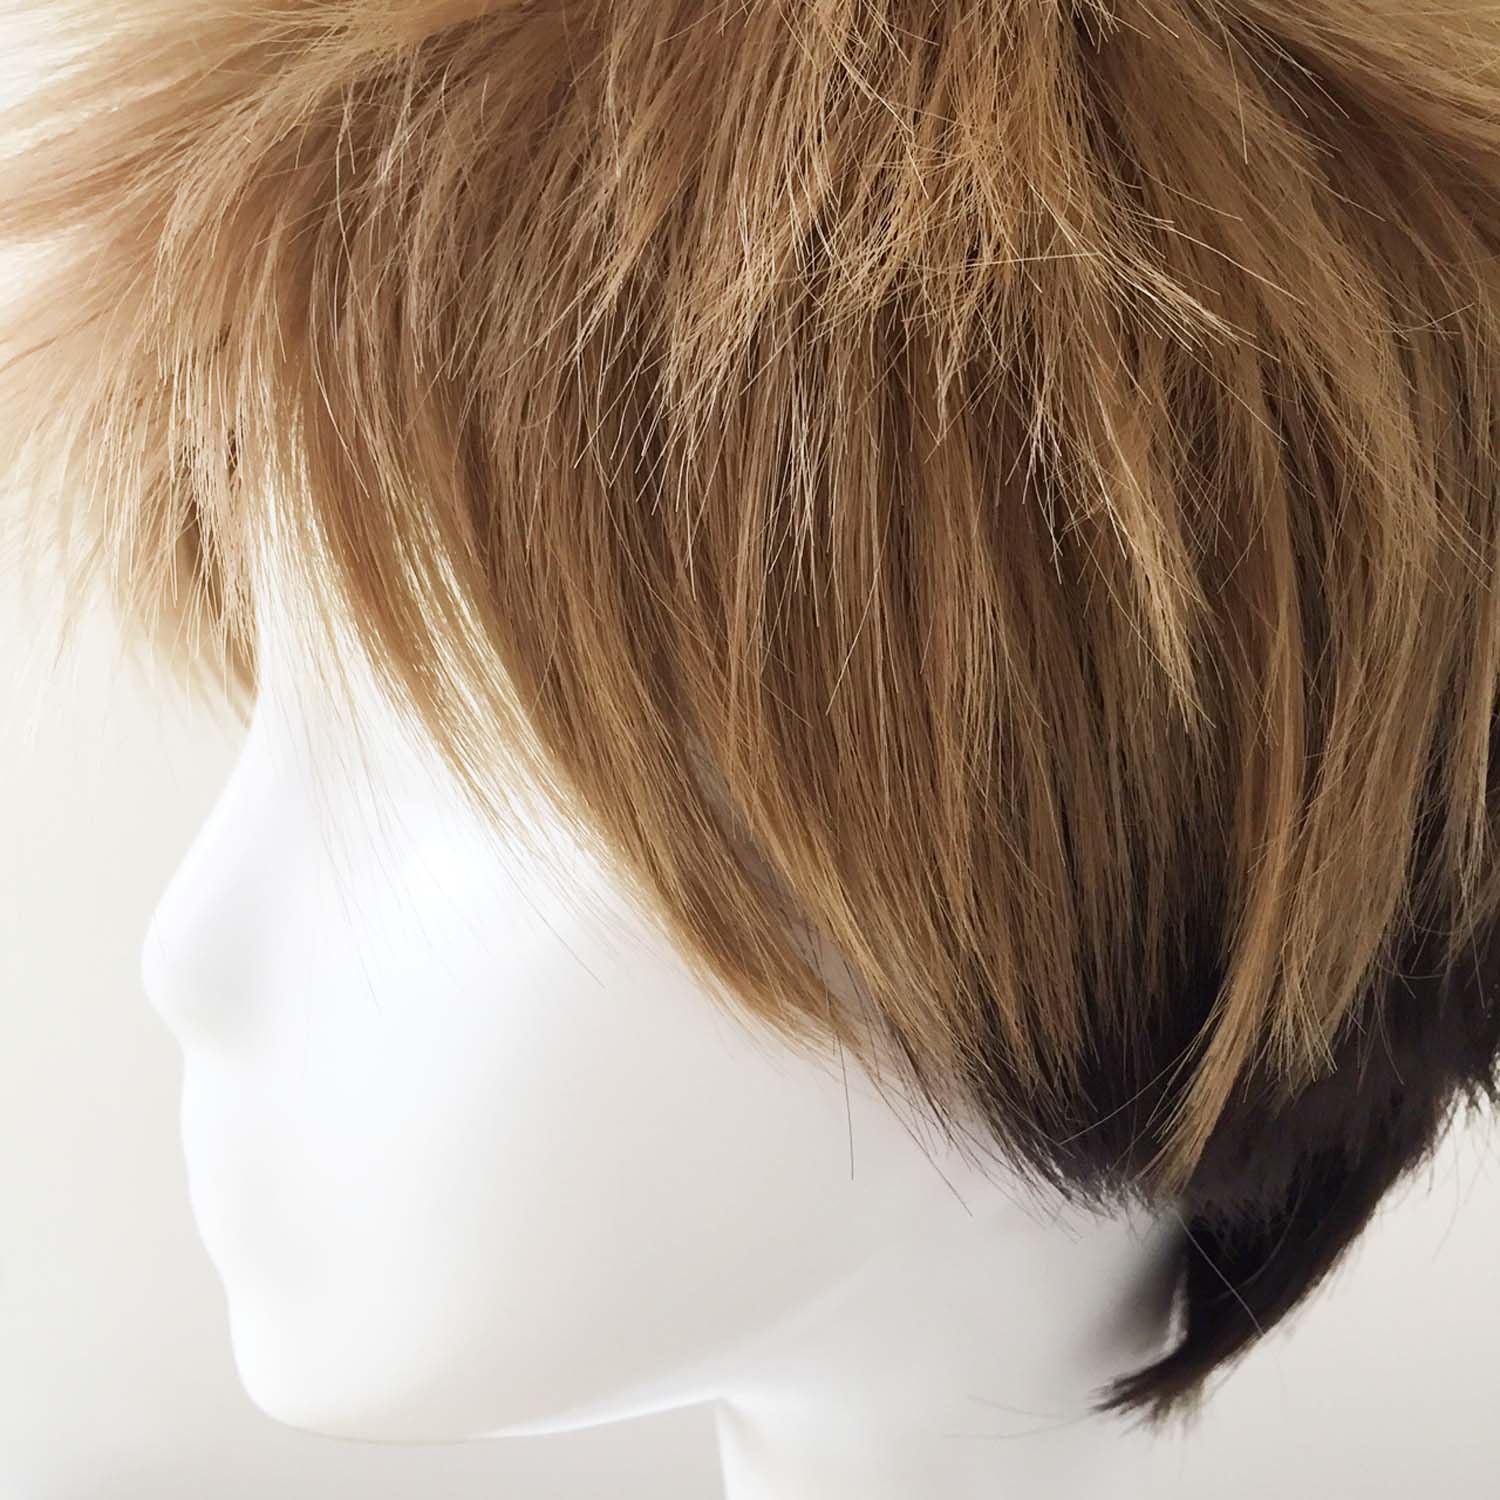 nevermindyrhead Men Brown Two Tone Short Straight Bouncy Fringe Bangs Pixie Cosplay Wig